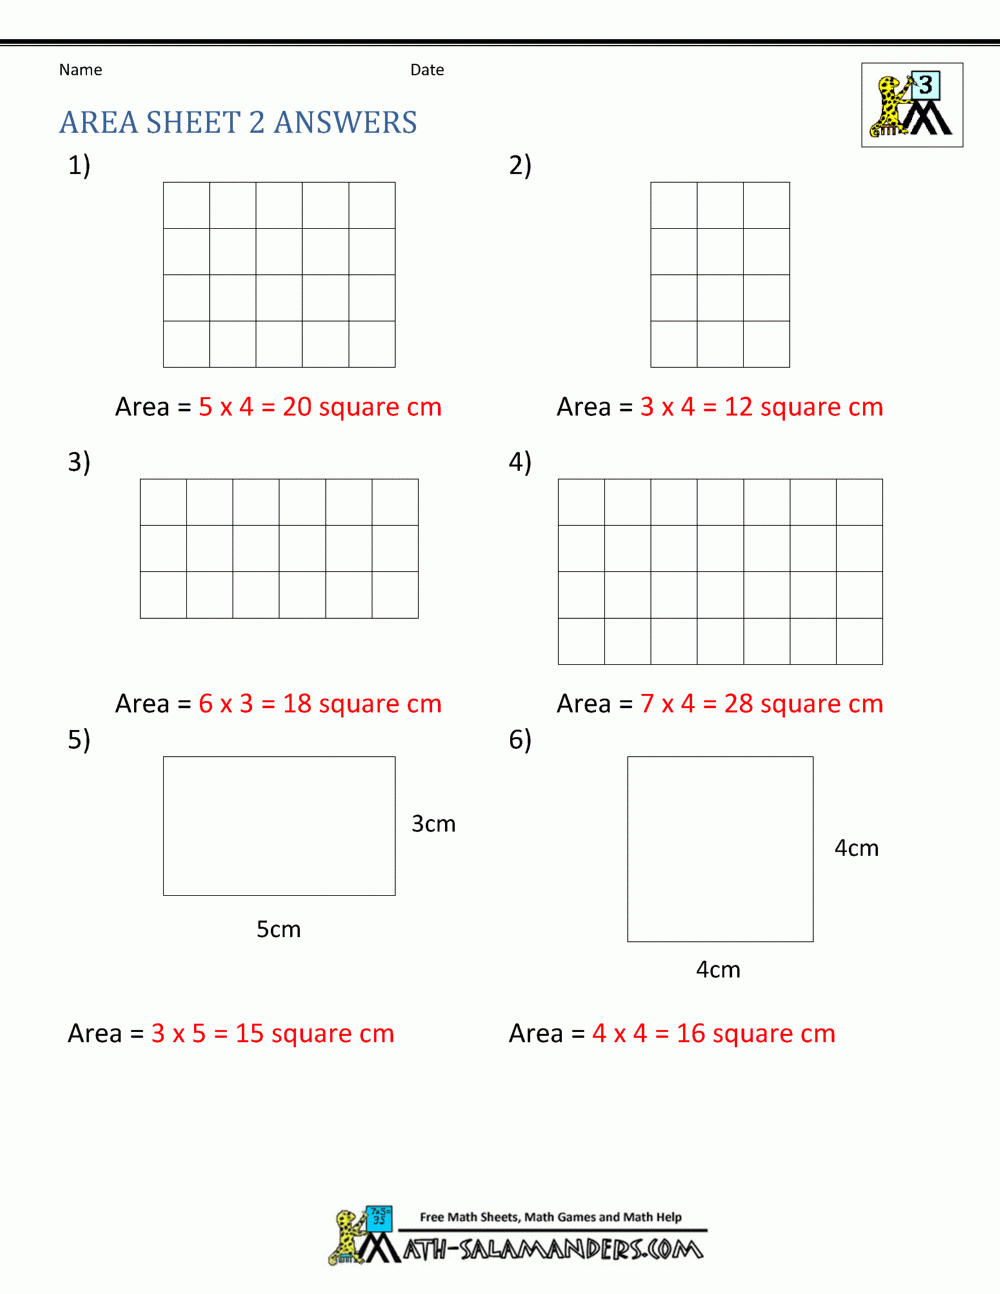 Area Of Quadrilateral Worksheets For Geometry Worksheet Kites And Trapezoids Answers Key